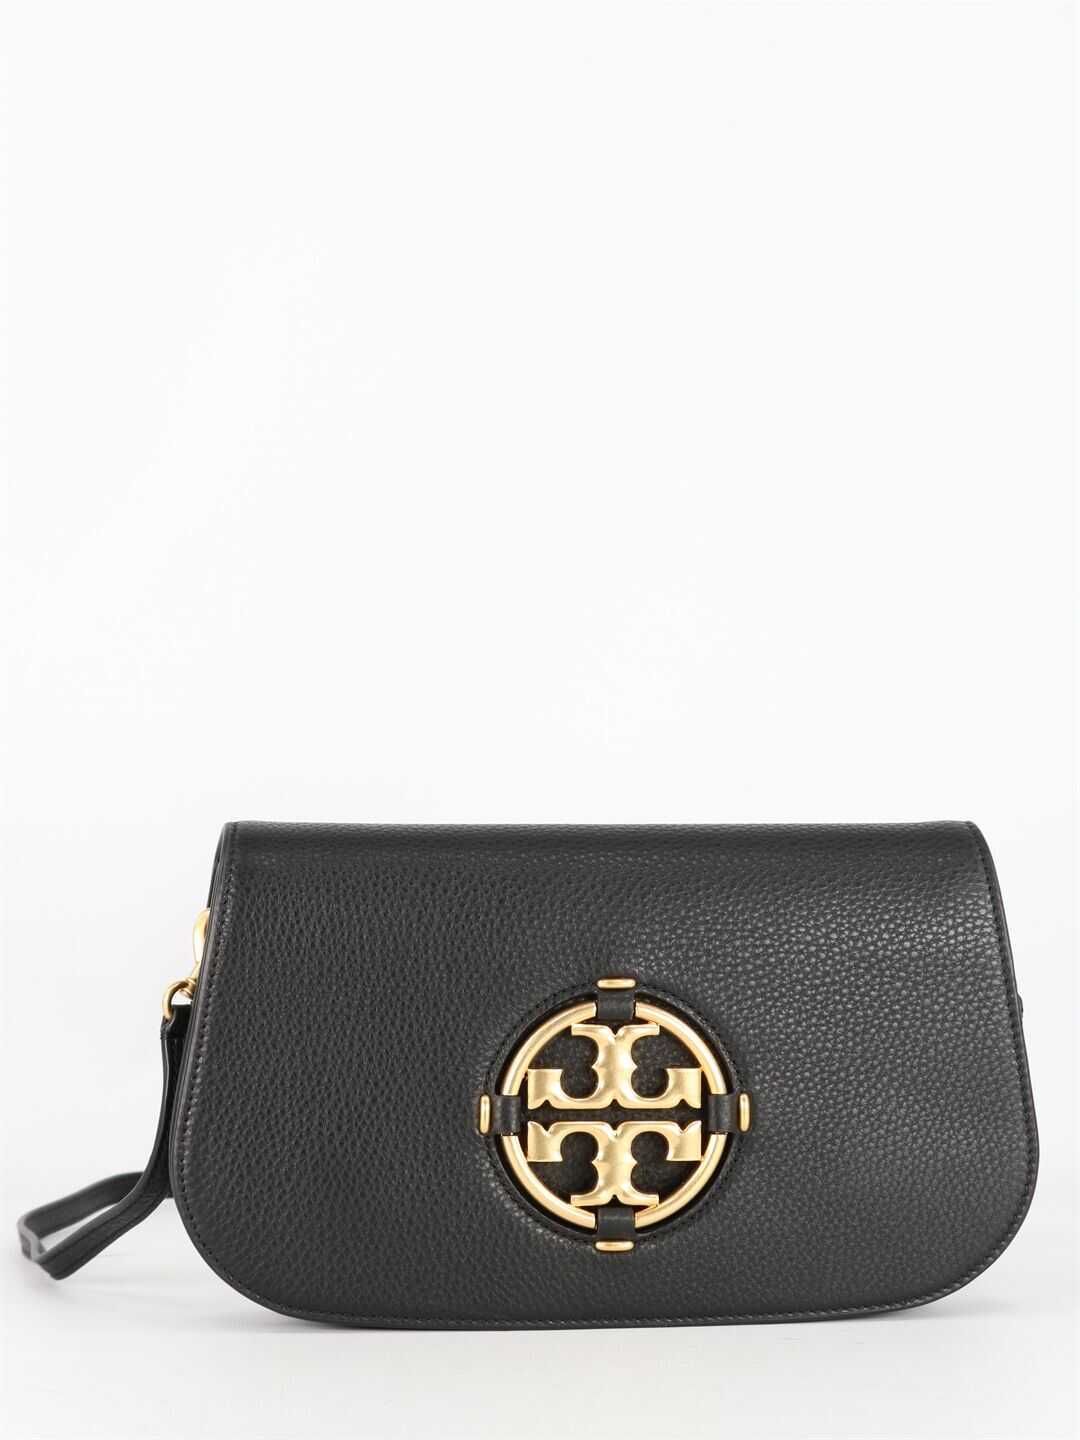 Tory Burch Small Miller Bag In Leather 81971 Black